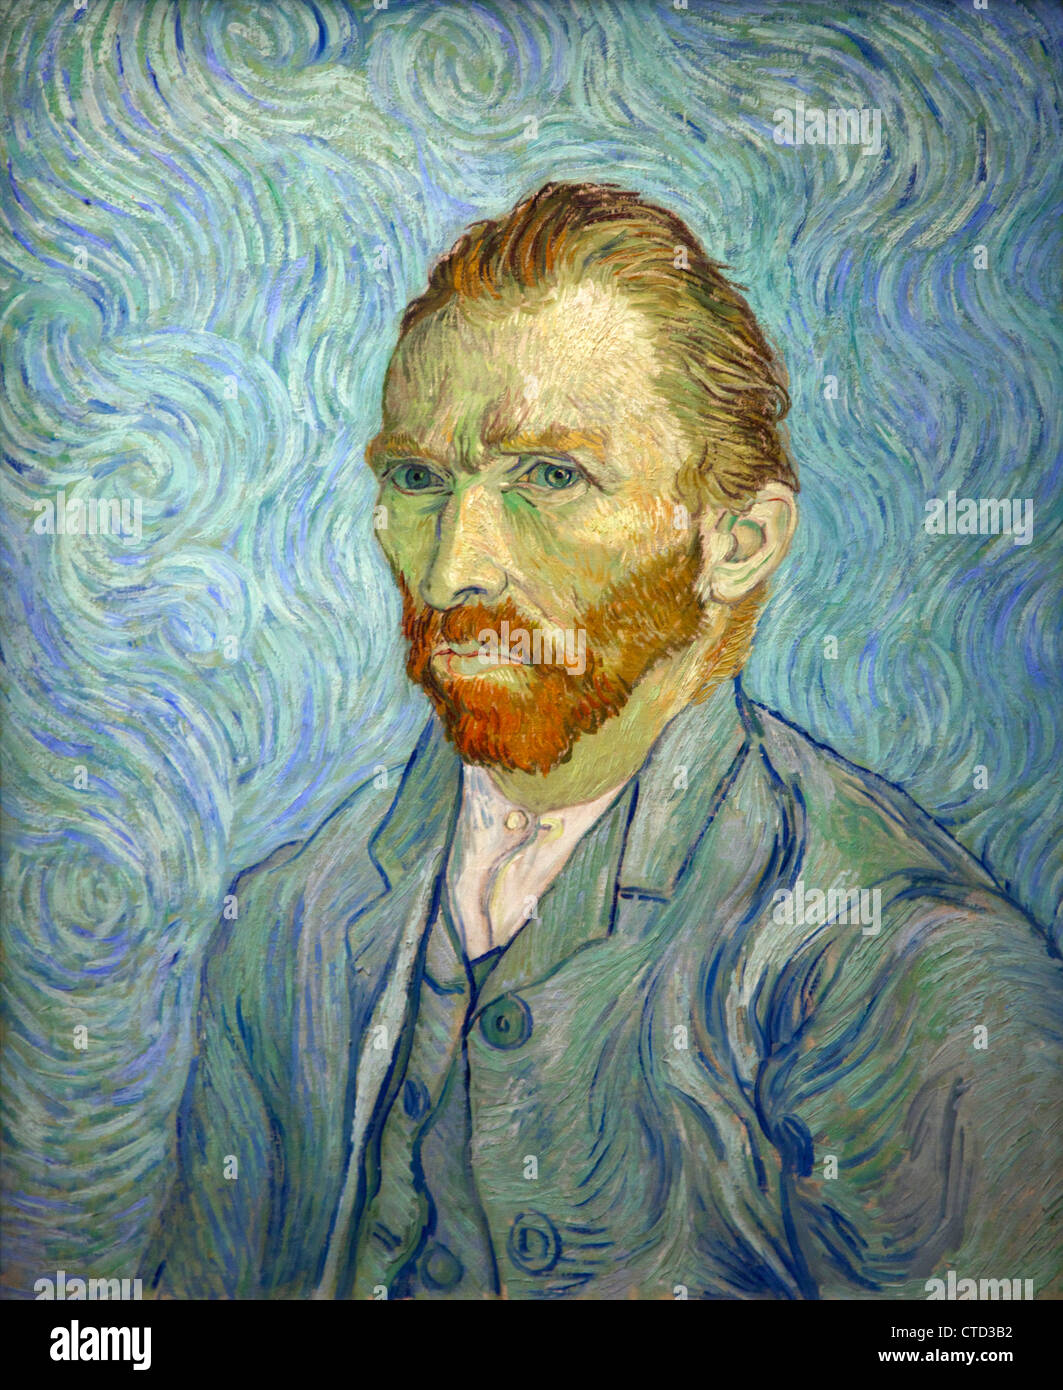 Self-portrait by Vincent van Gogh 1889, Musee D'Orsay Art Gallery and Museum, Paris, France, Europe Stock Photo